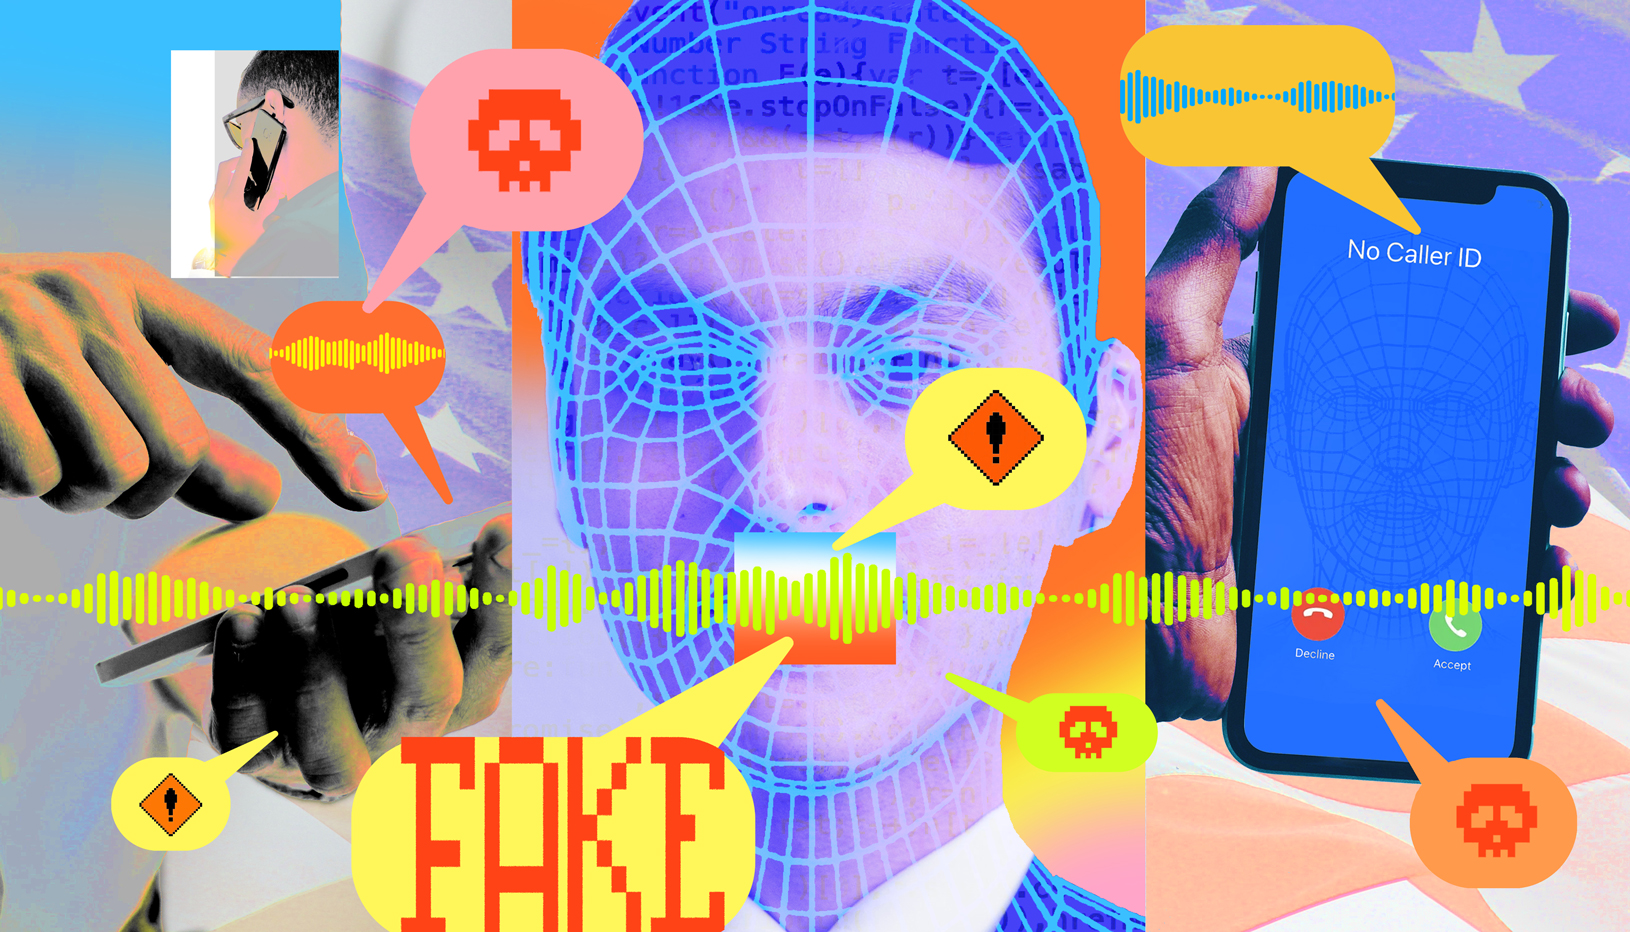 Illustration of person with speech bubble saying "Fake," and a phone screen